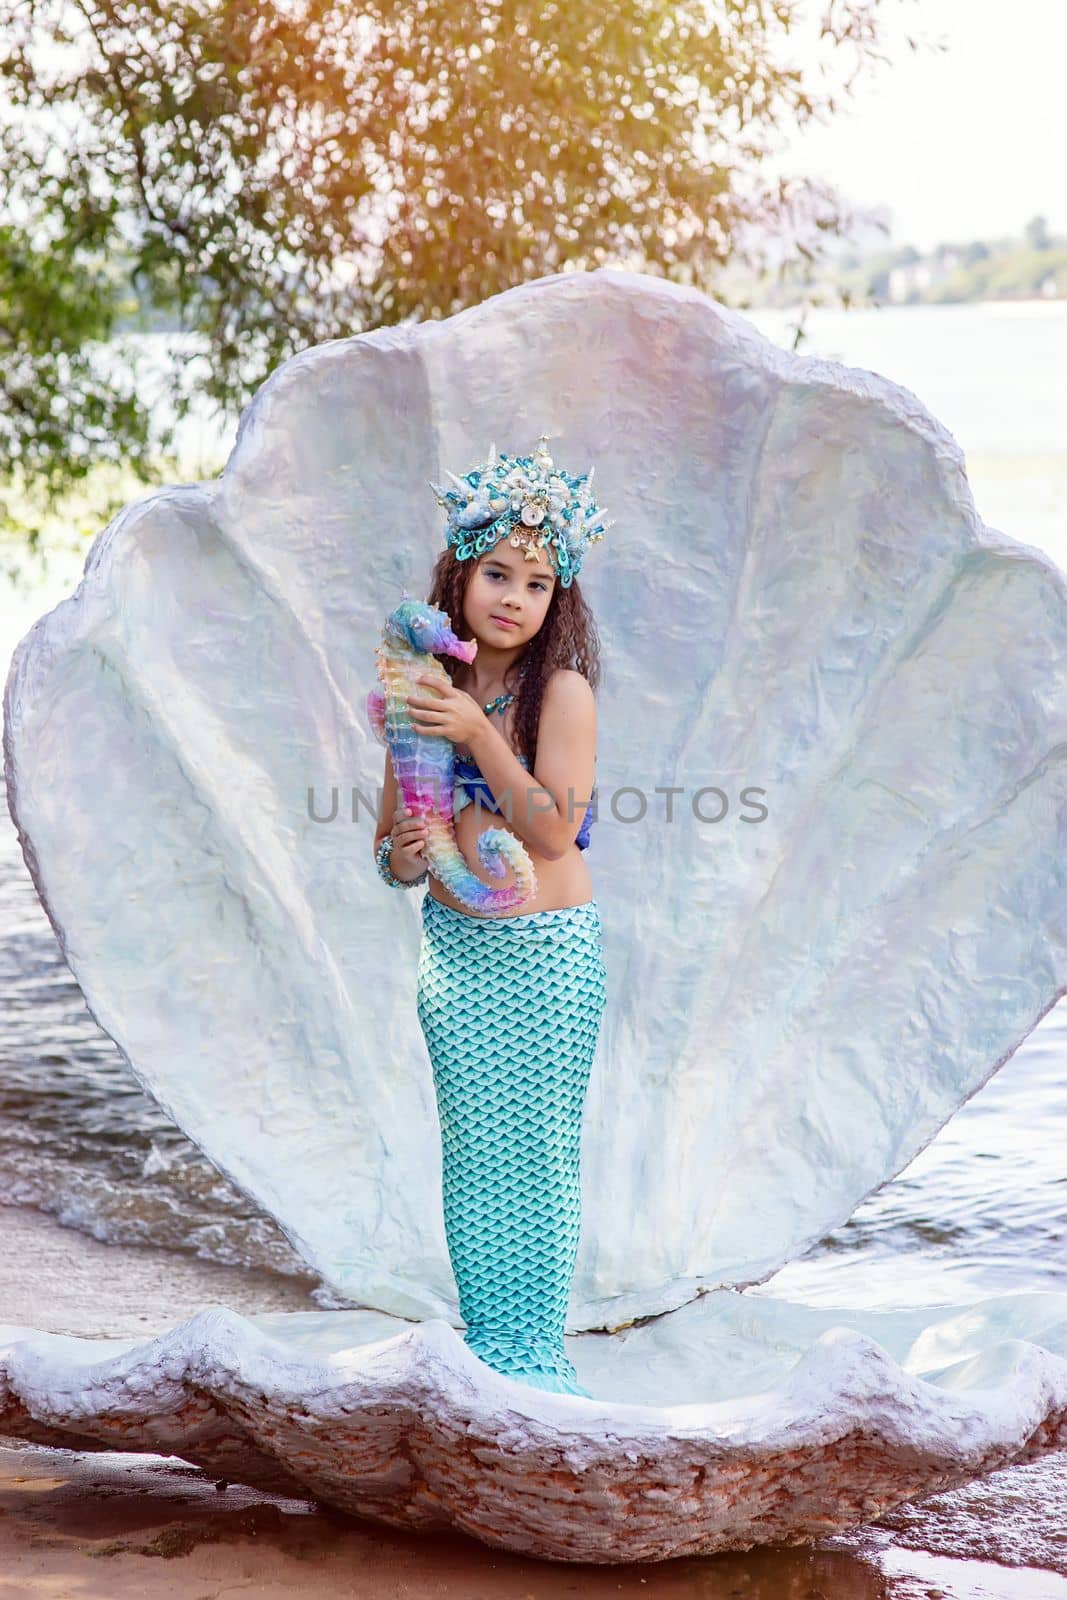 A smiling little girl in a turquoise mermaid costume and a crown is standing outdoors, in a large seashell, holding a colorful seahorse toy. Vertical. Close up. Copy space